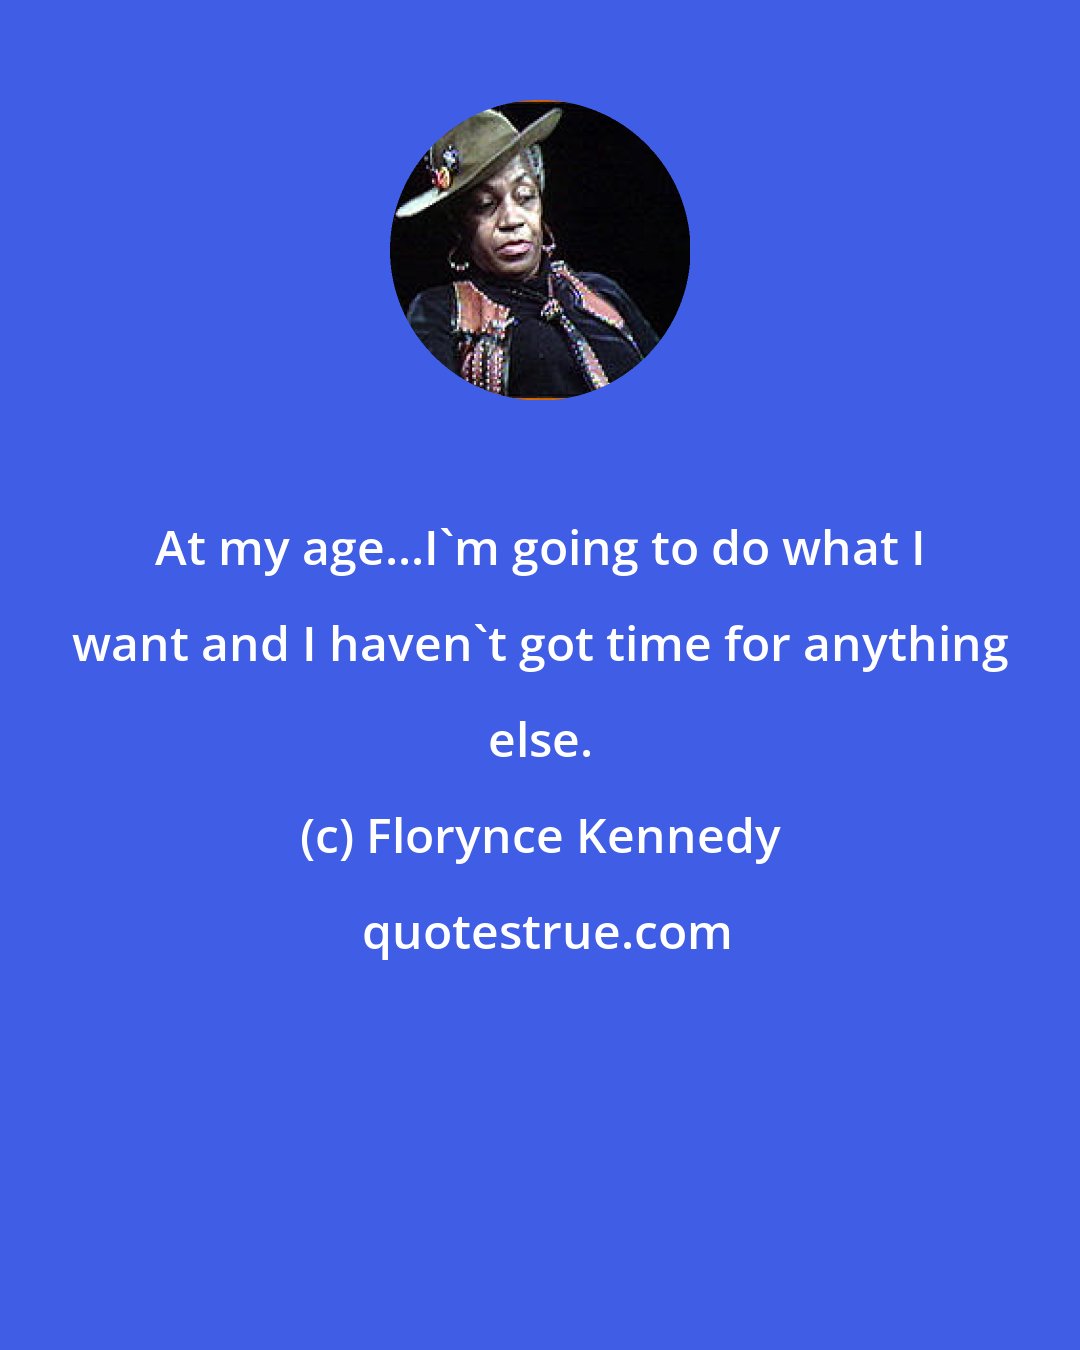 Florynce Kennedy: At my age...I'm going to do what I want and I haven't got time for anything else.